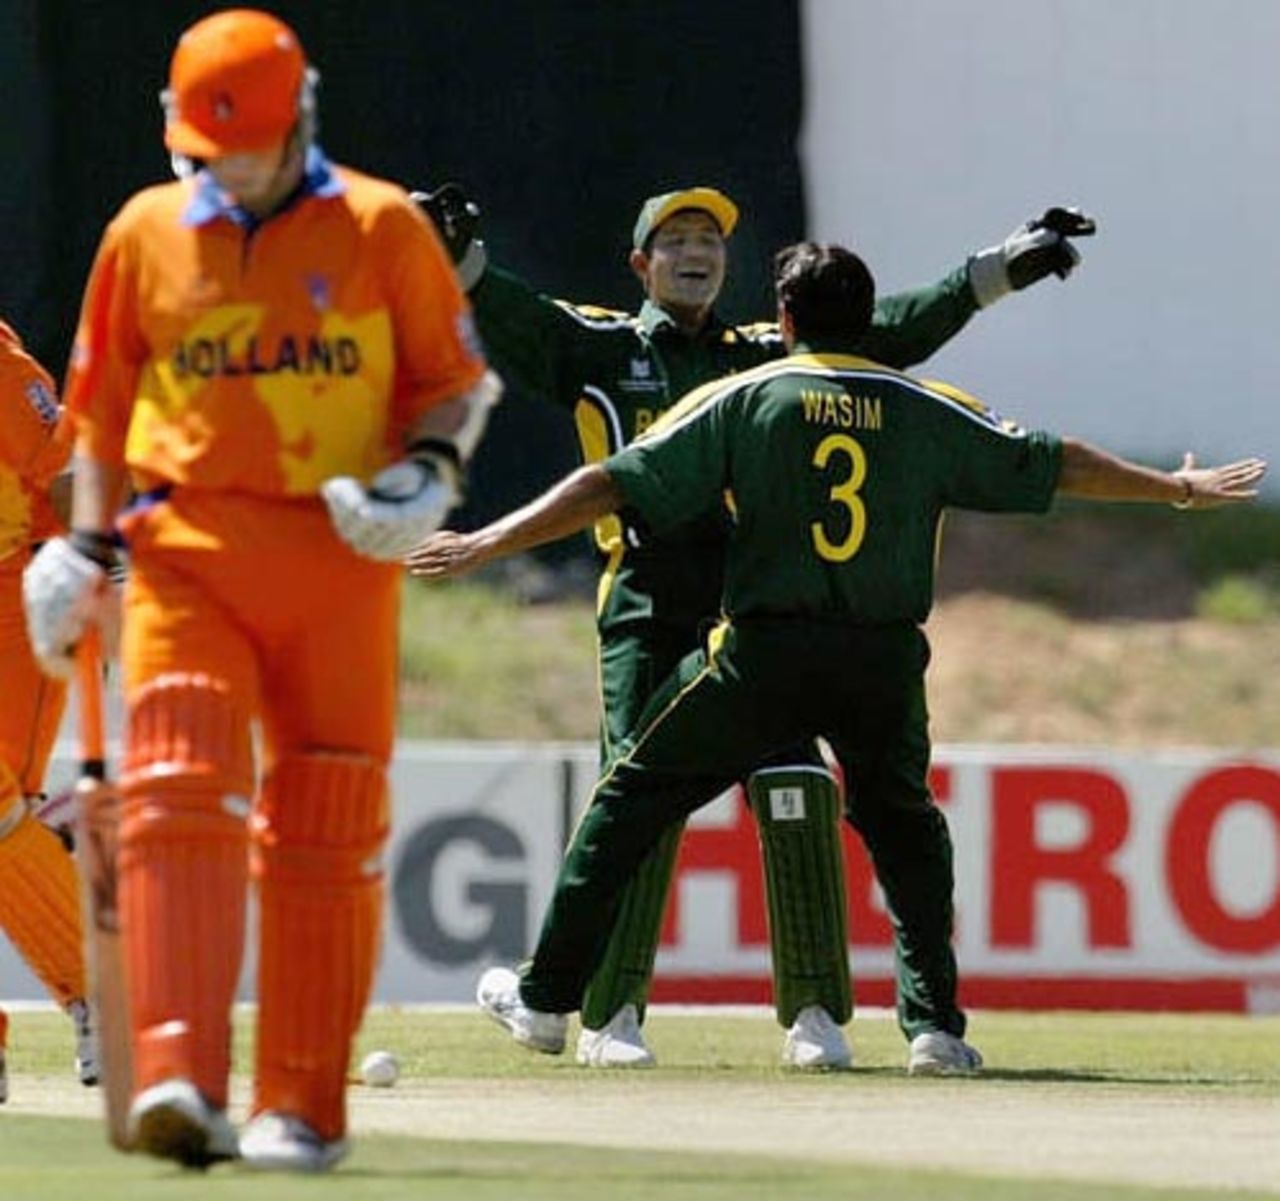 World Cup, 2003 - Netherlands v Pakistan at Paarl, 25th February 2003